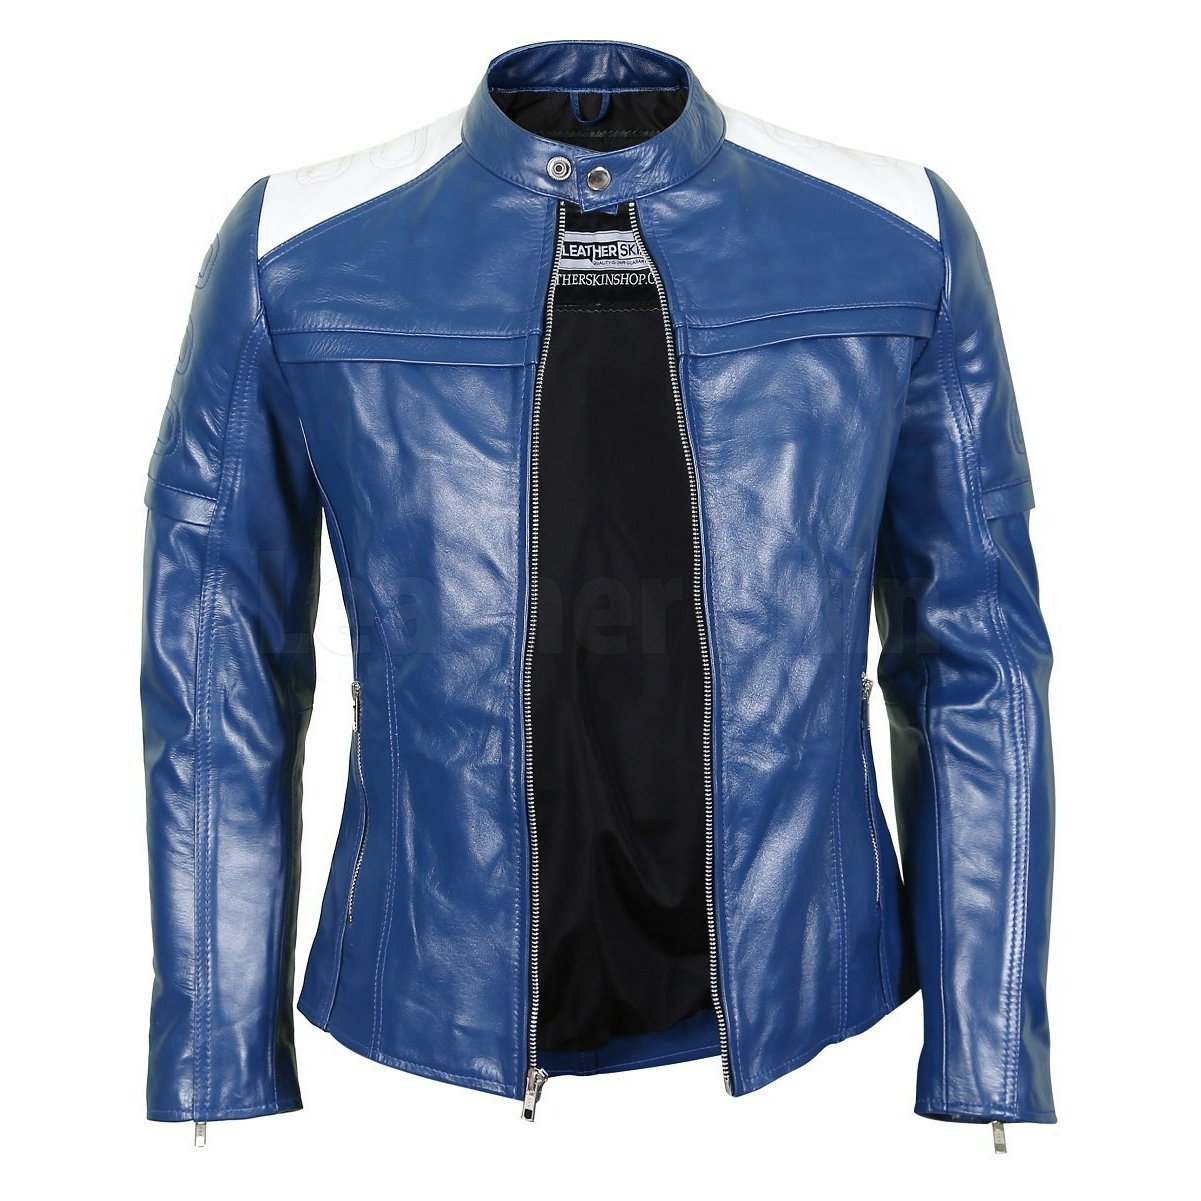 Blue Unisex Premium Genuine Pure Leather Jacket with Quilted Lining